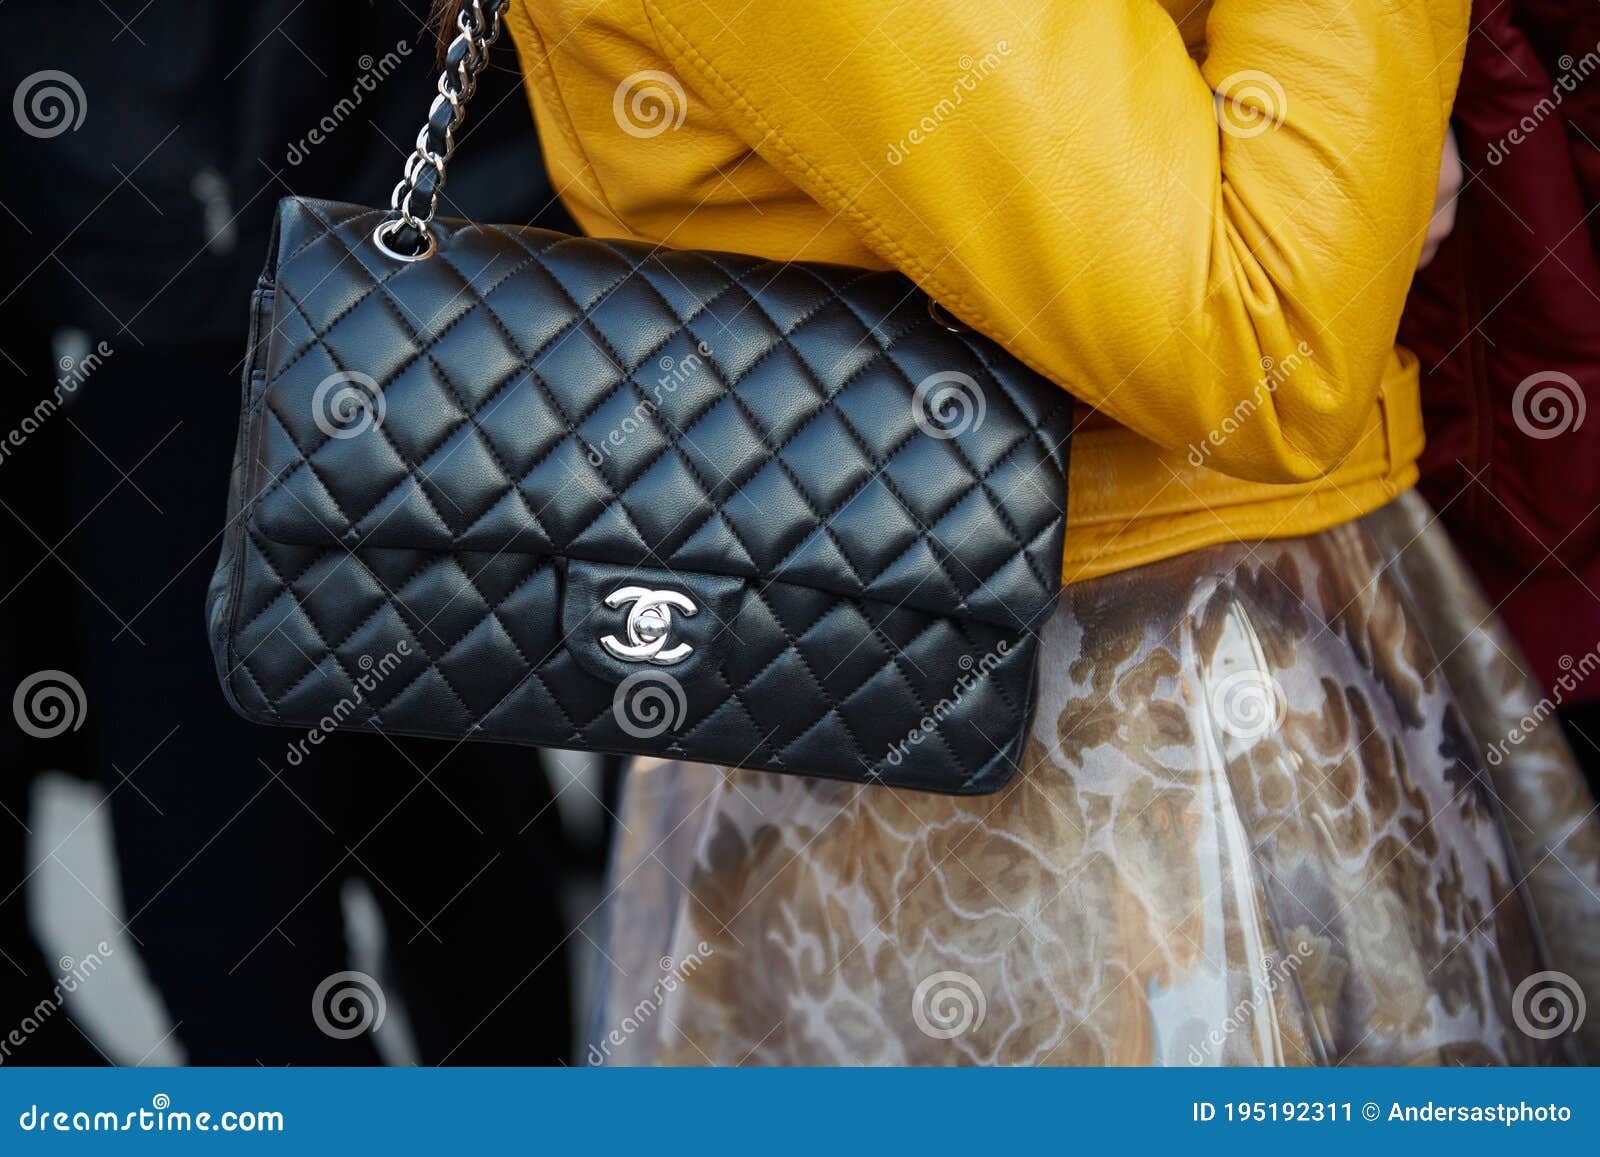 Woman with black leather Chanel bag and silver leather jacket